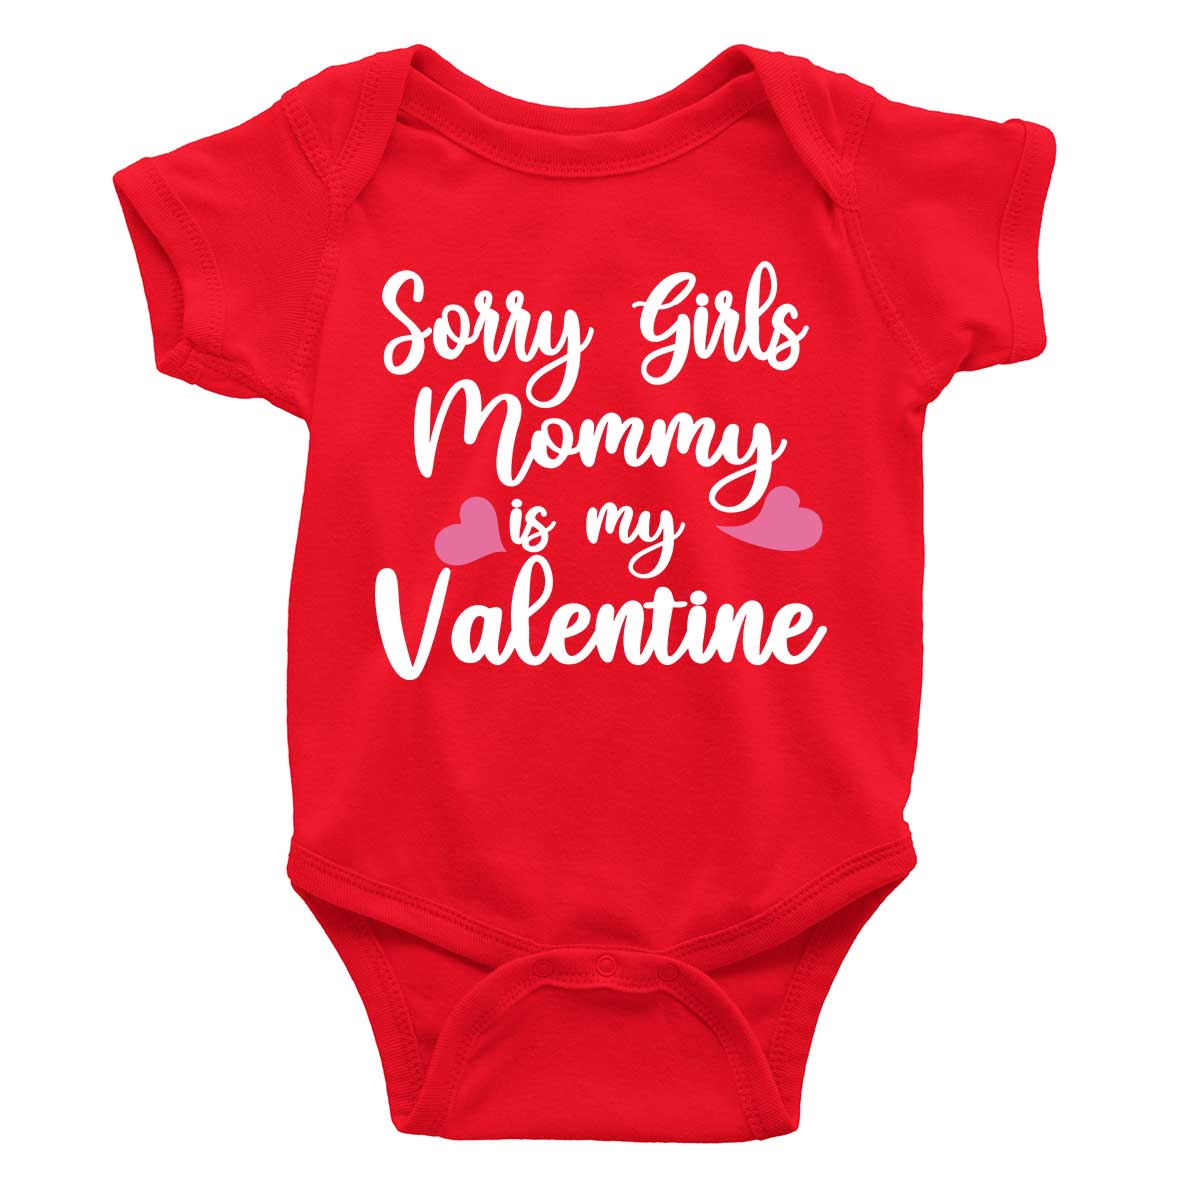 jopo sorry girls mommy is my valentine Red